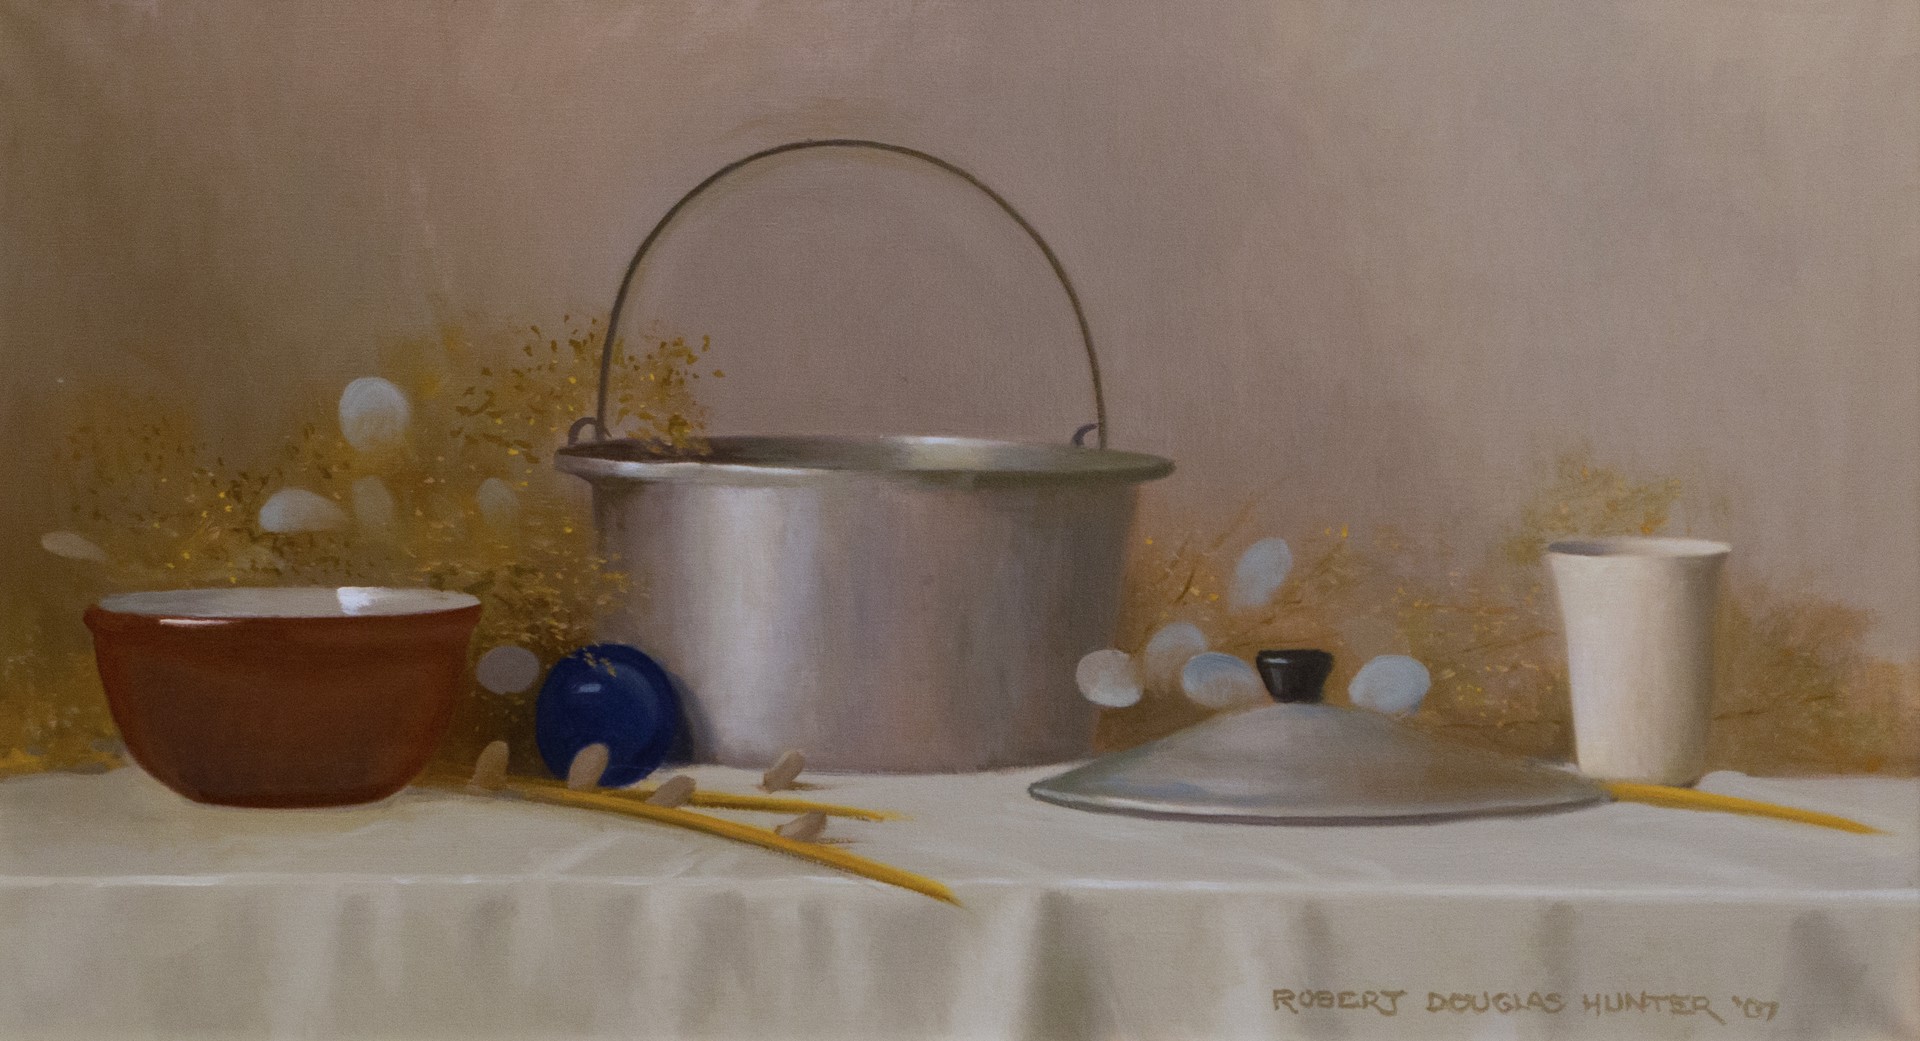 Still Life with Aluminum Cooking Kettle by Robert Douglas Hunter